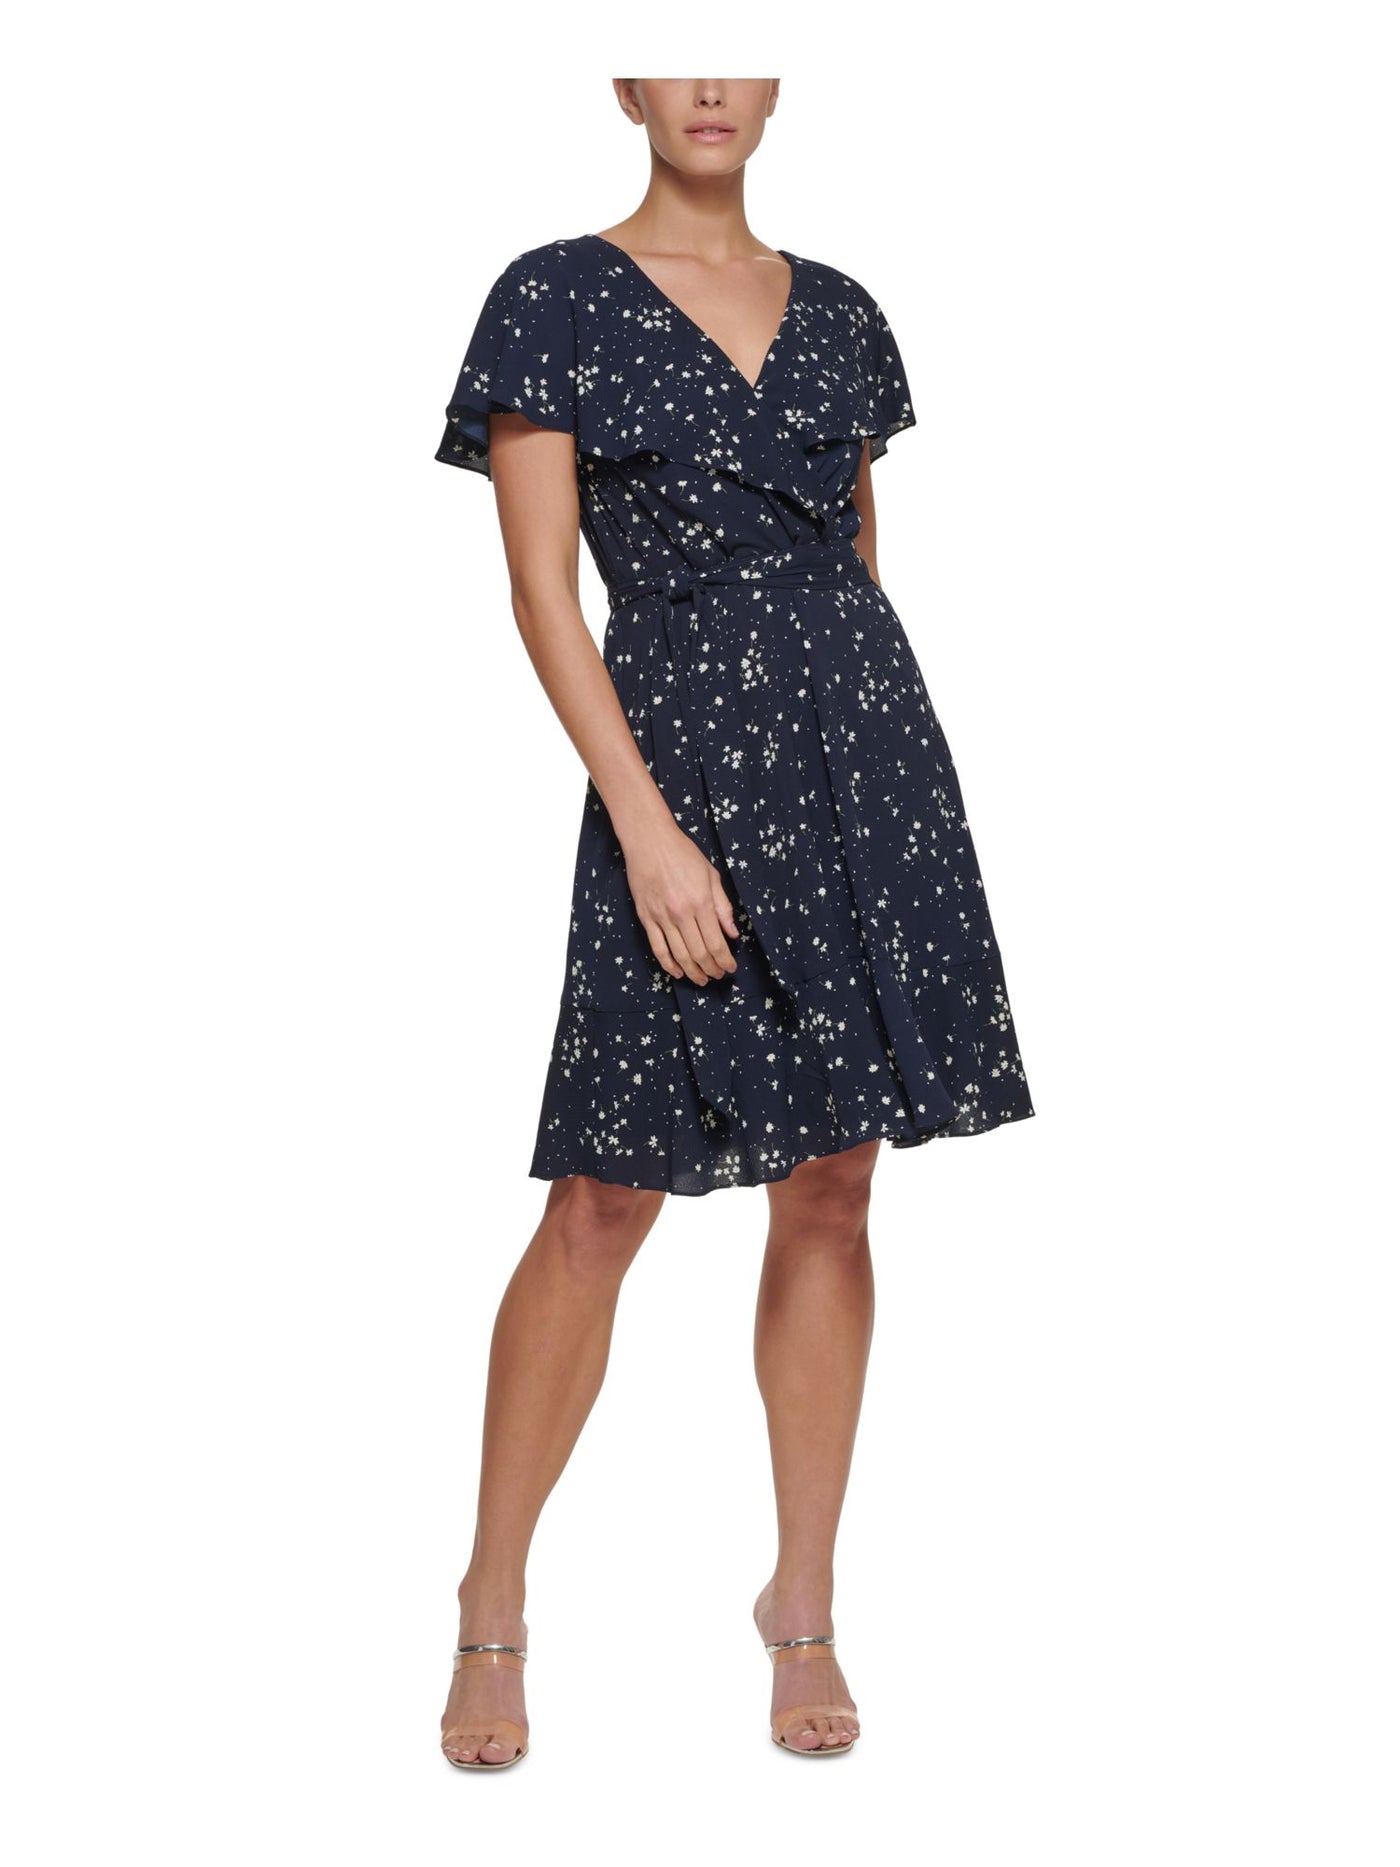 DKNY Womens Navy Zippered Belted Ruffled Hem Lined Floral Flutter Sleeve V Neck Above The Knee Wear To Work Fit + Flare Dress Petites 10P